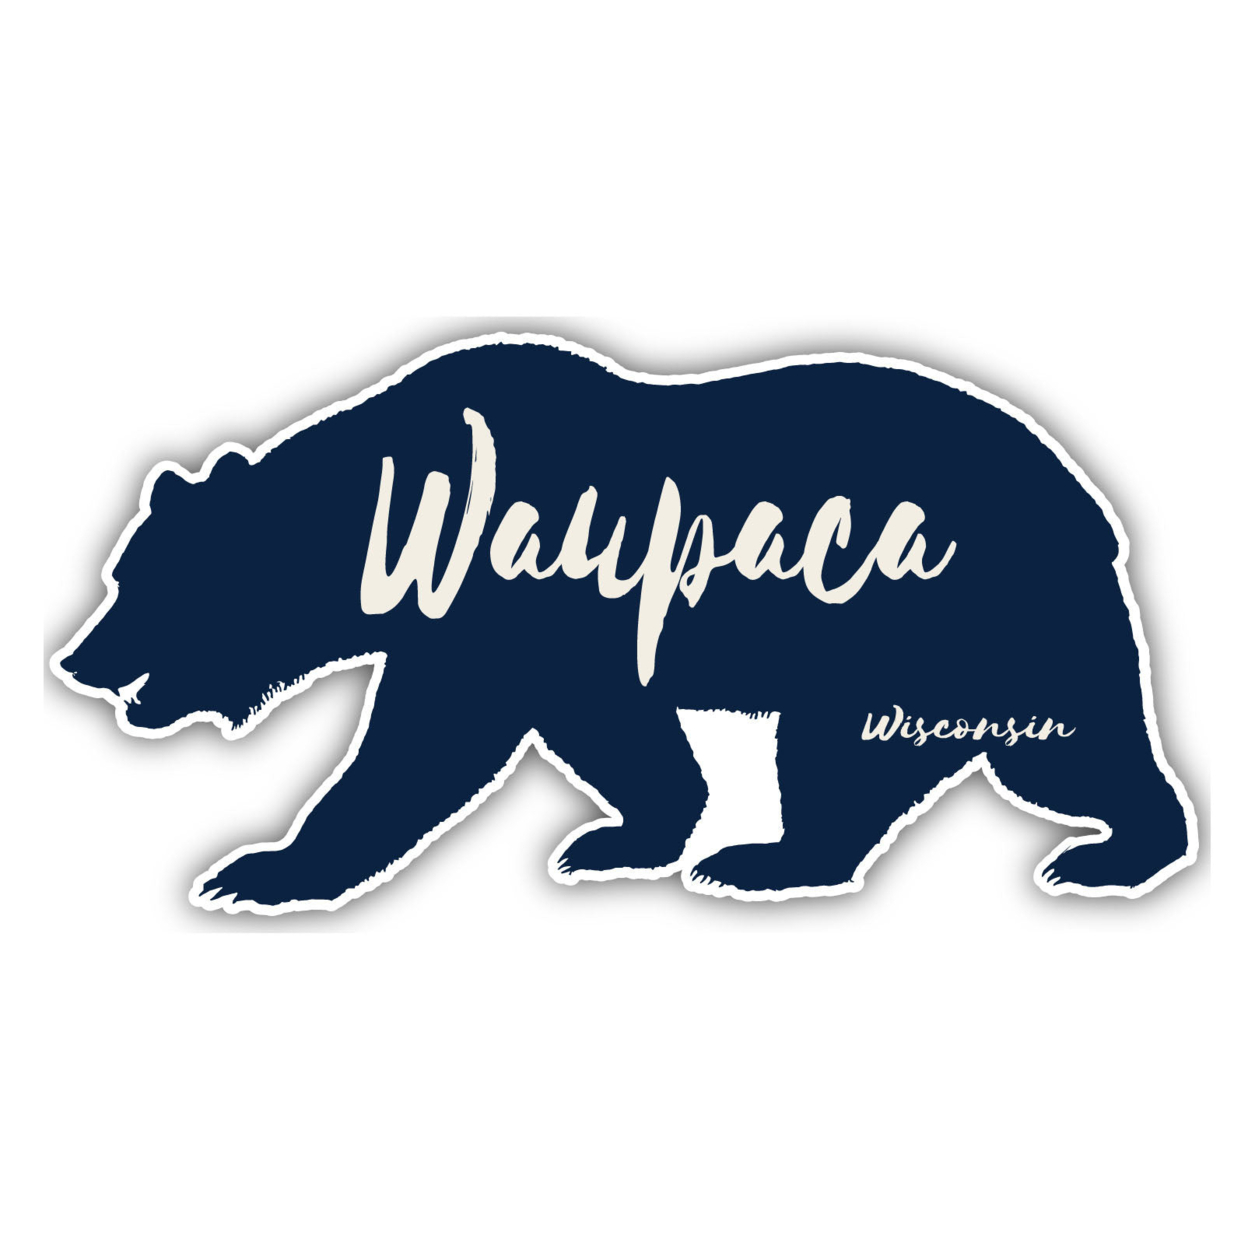 Waupaca Wisconsin Souvenir Decorative Stickers (Choose Theme And Size) - Single Unit, 2-Inch, Great Outdoors